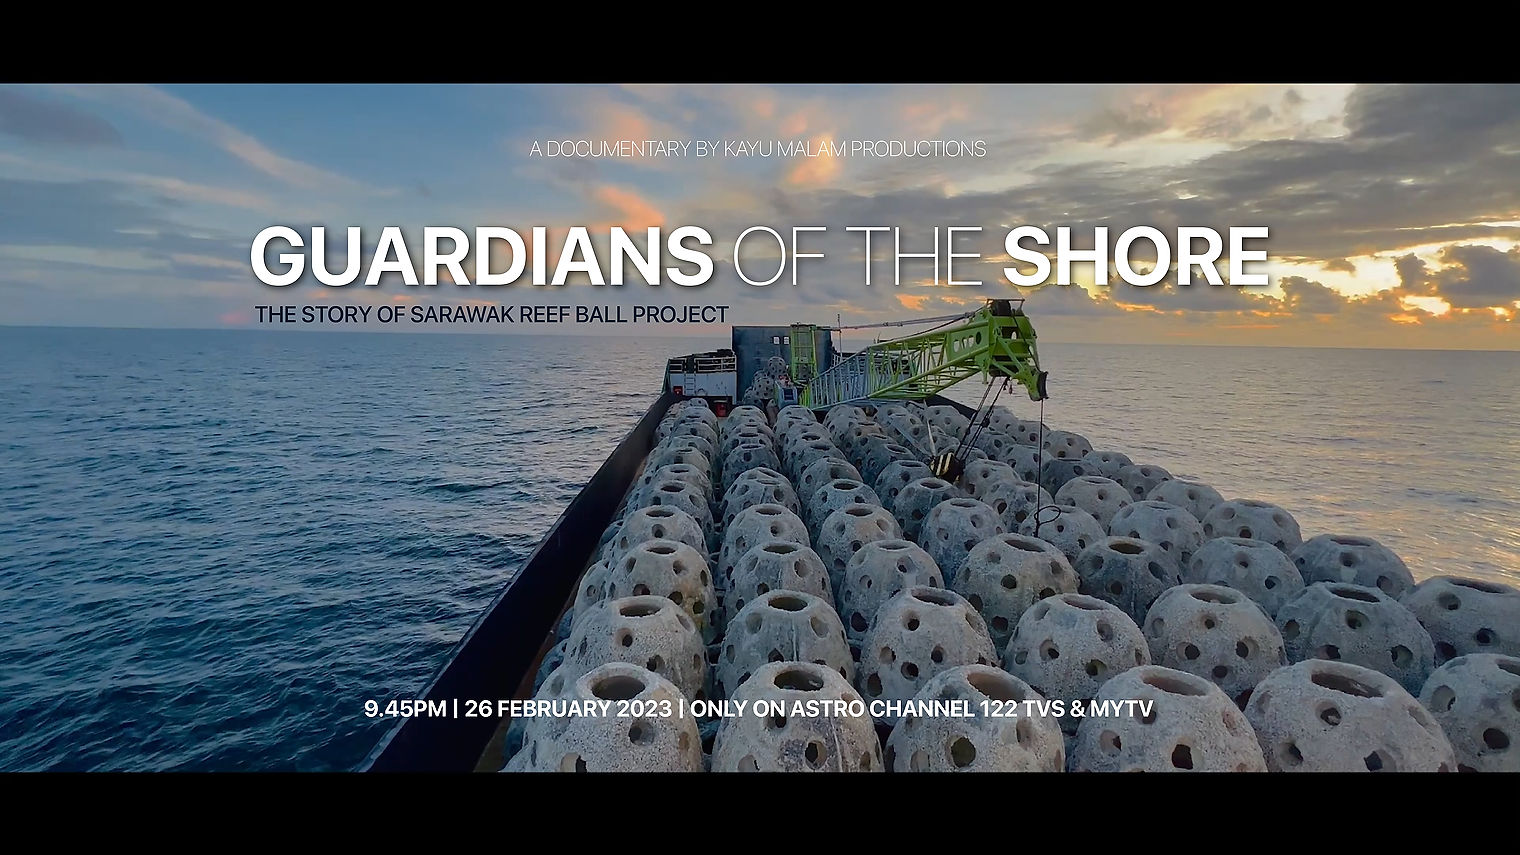 Guardians of the Shore (1 minute trailer)